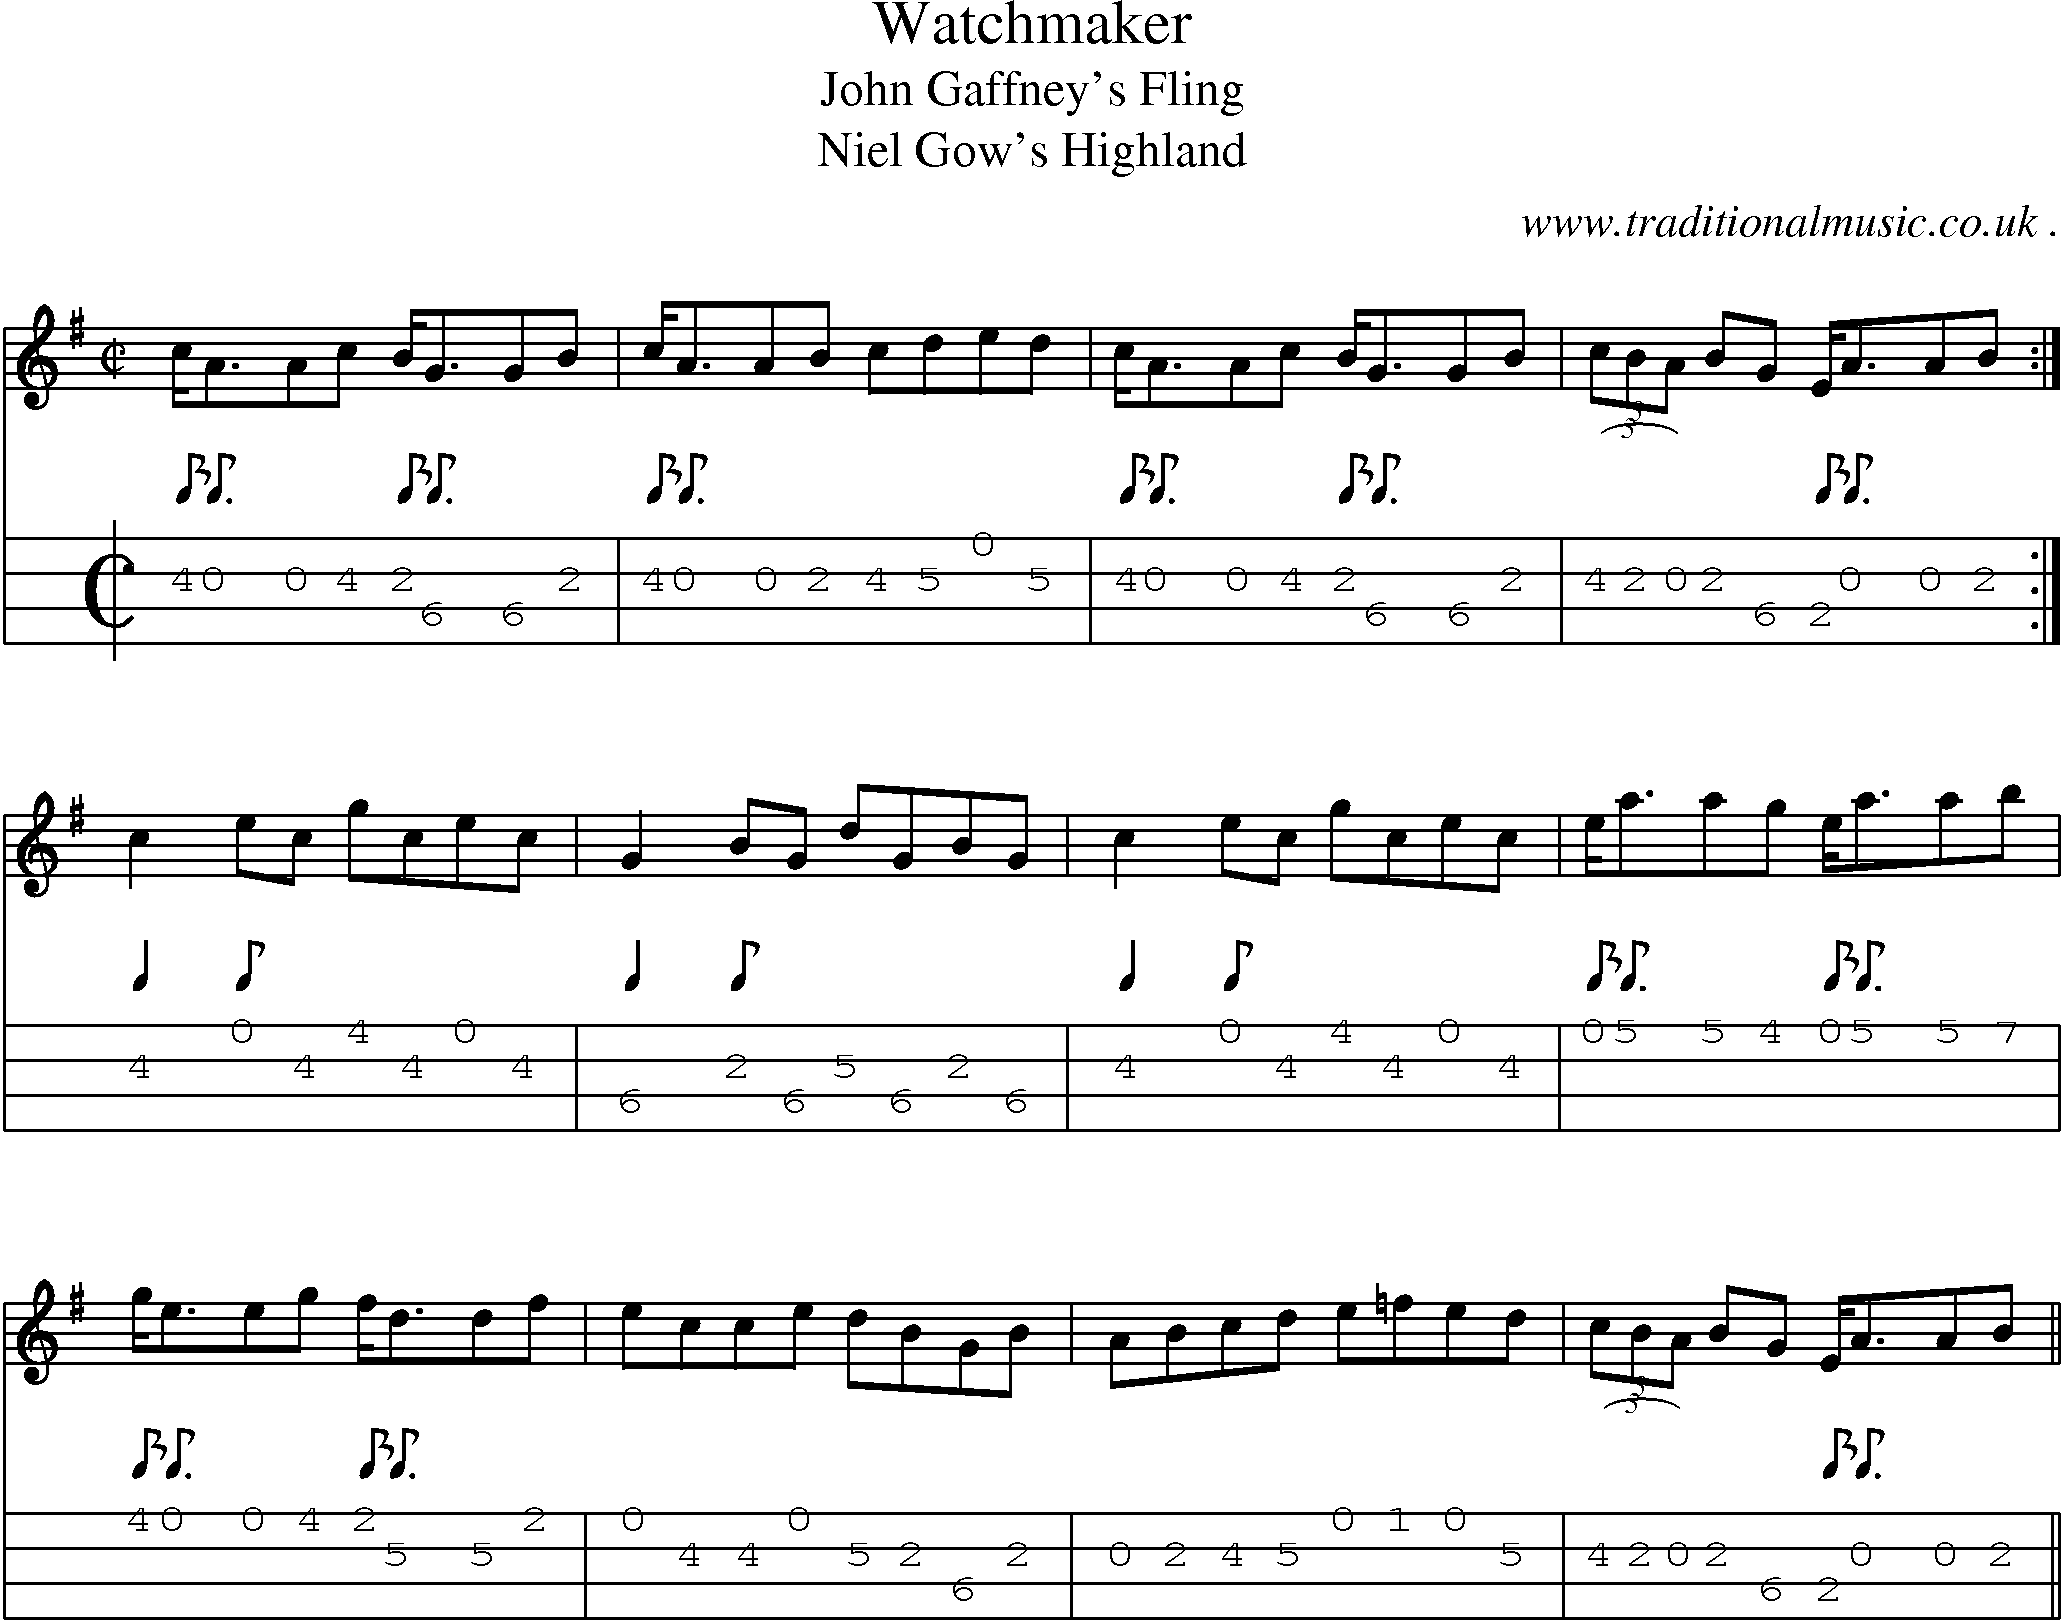 Sheet-Music and Mandolin Tabs for Watchmaker